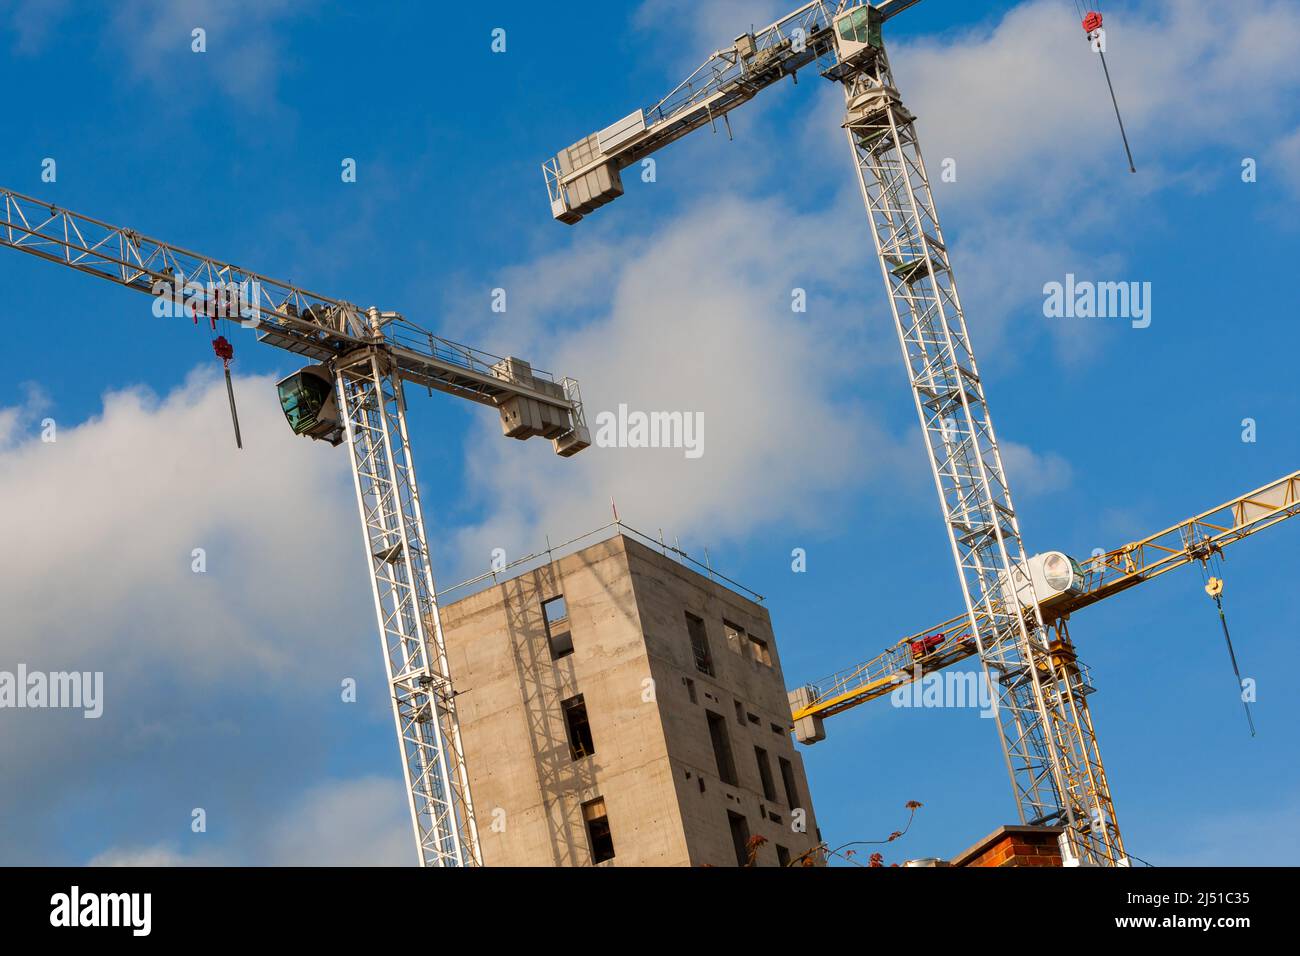 Cranes on a Construction or Building SIte with a blue sky Stock Photo